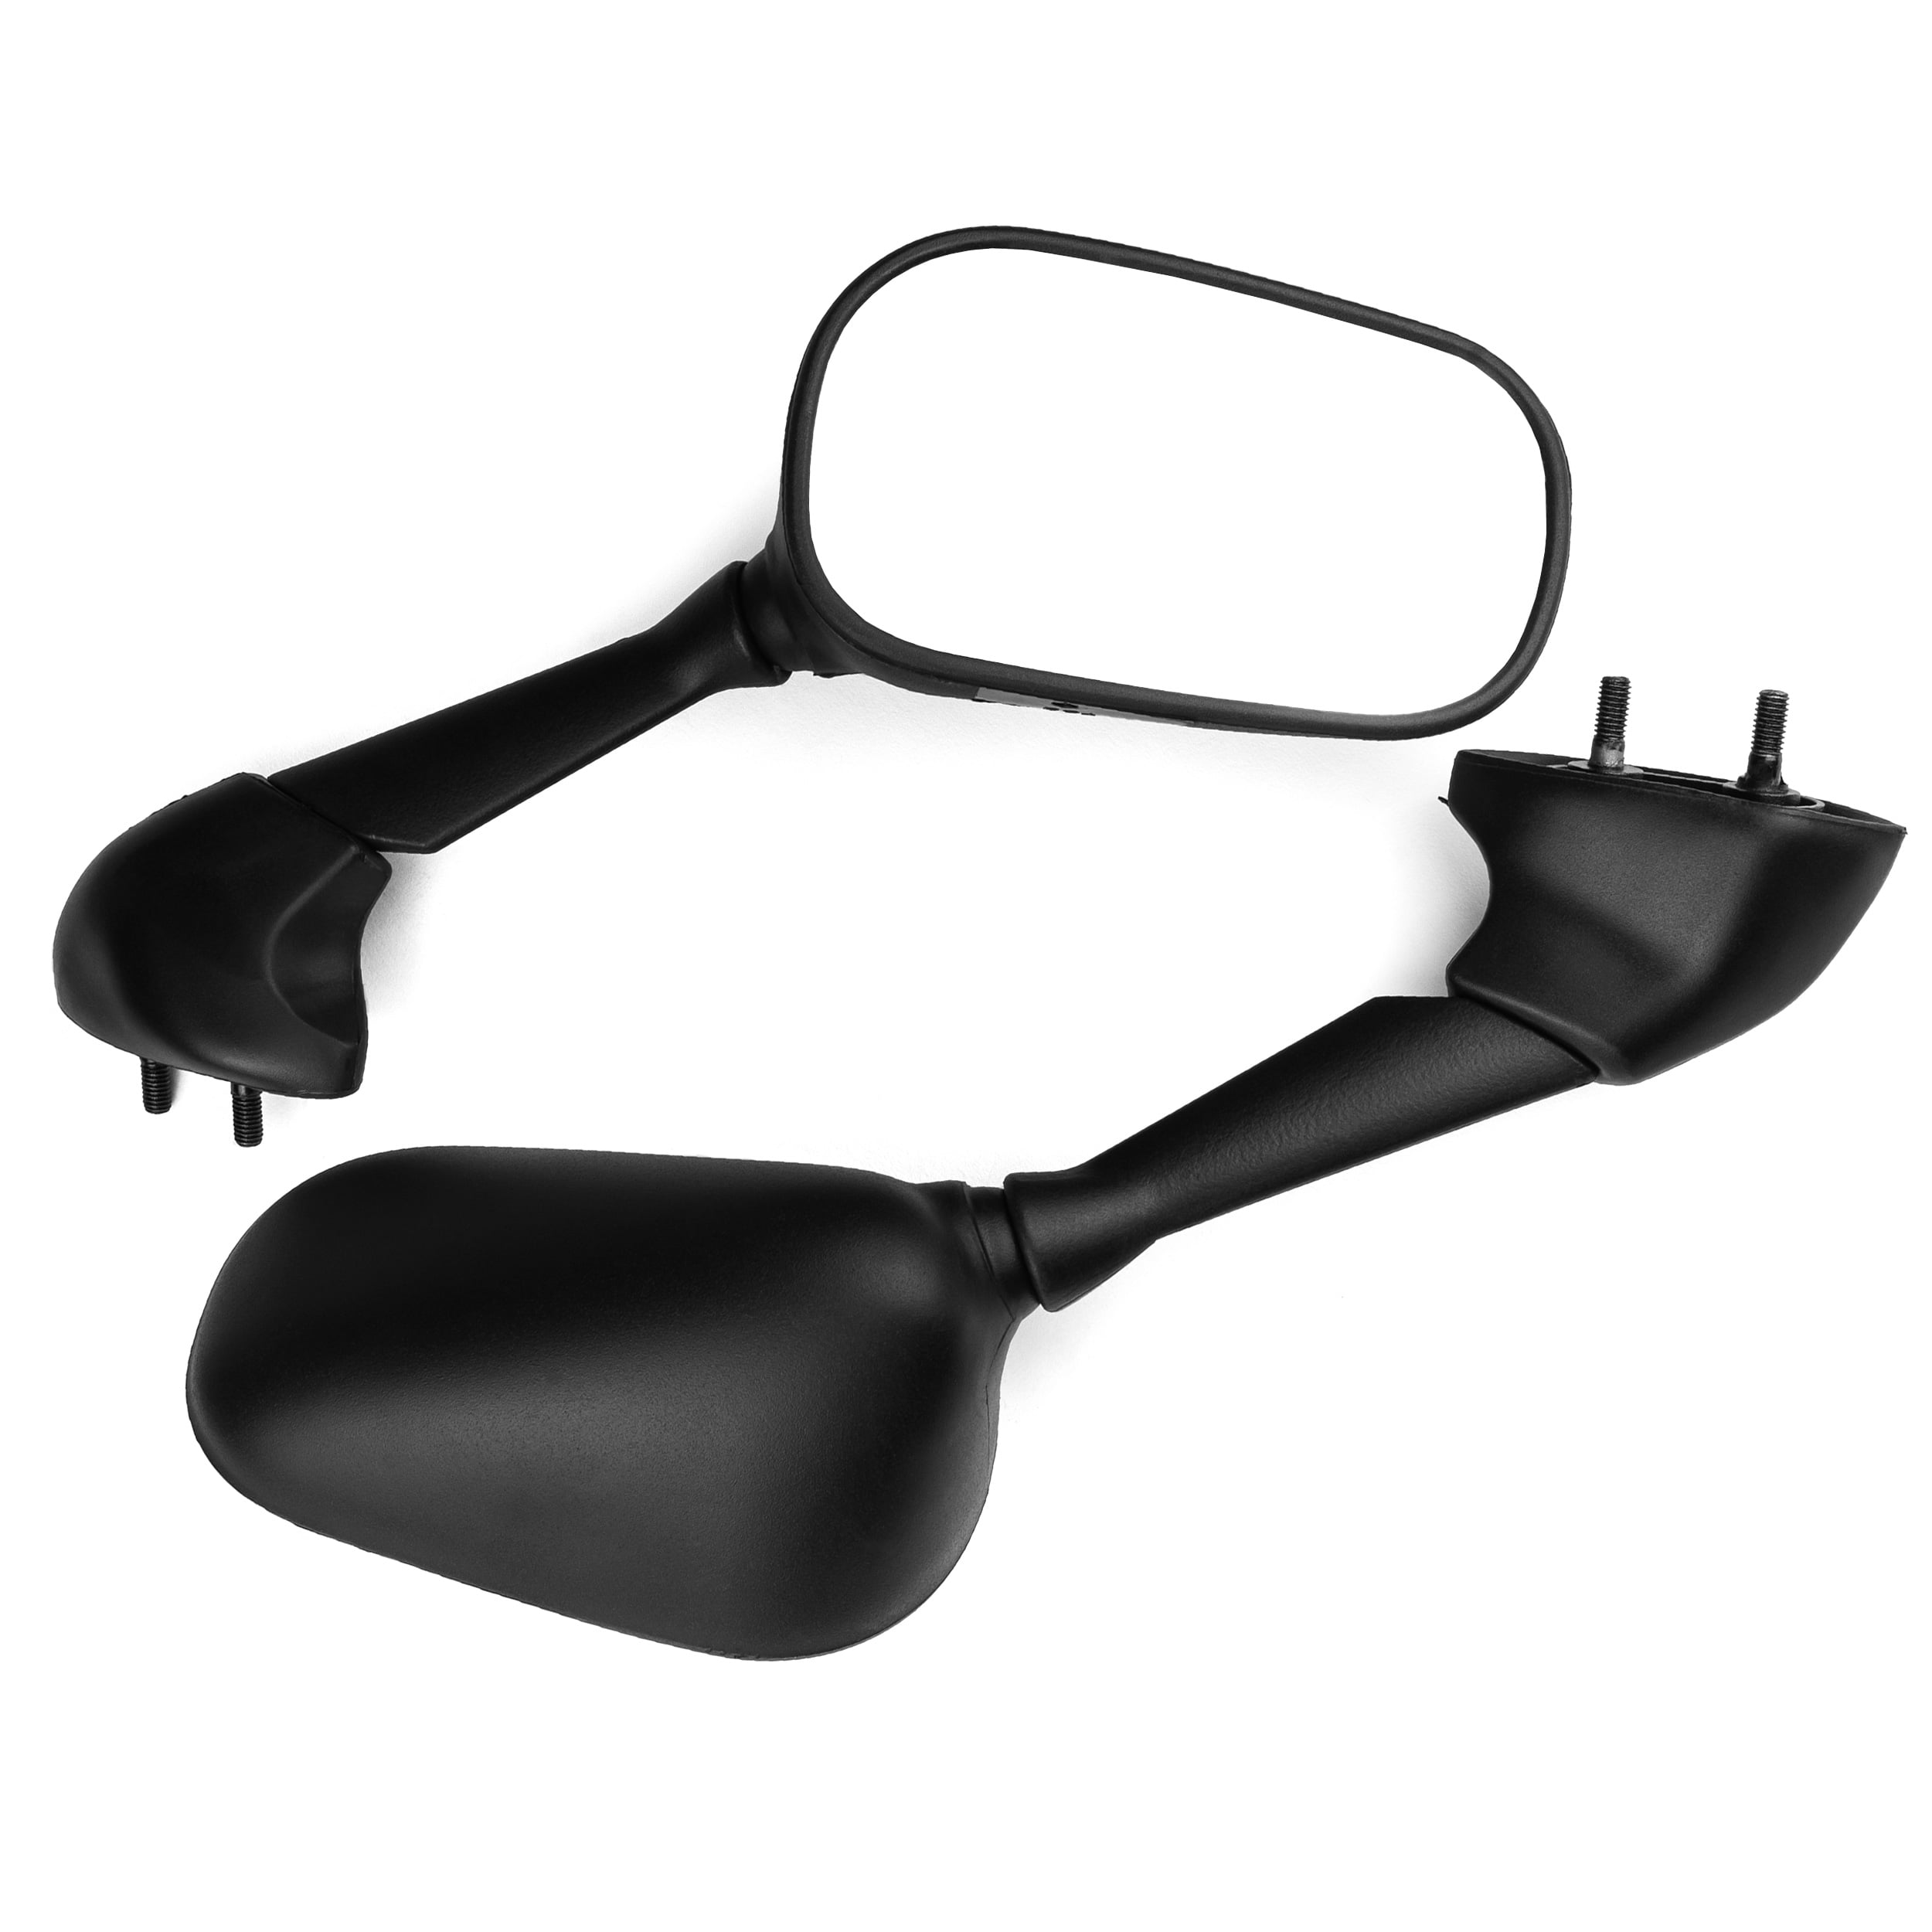 Oem Replacement Racing Mirrors For Yamaha Yzfr1 Yzf-R1 R1 2007 2008 07-08 Black